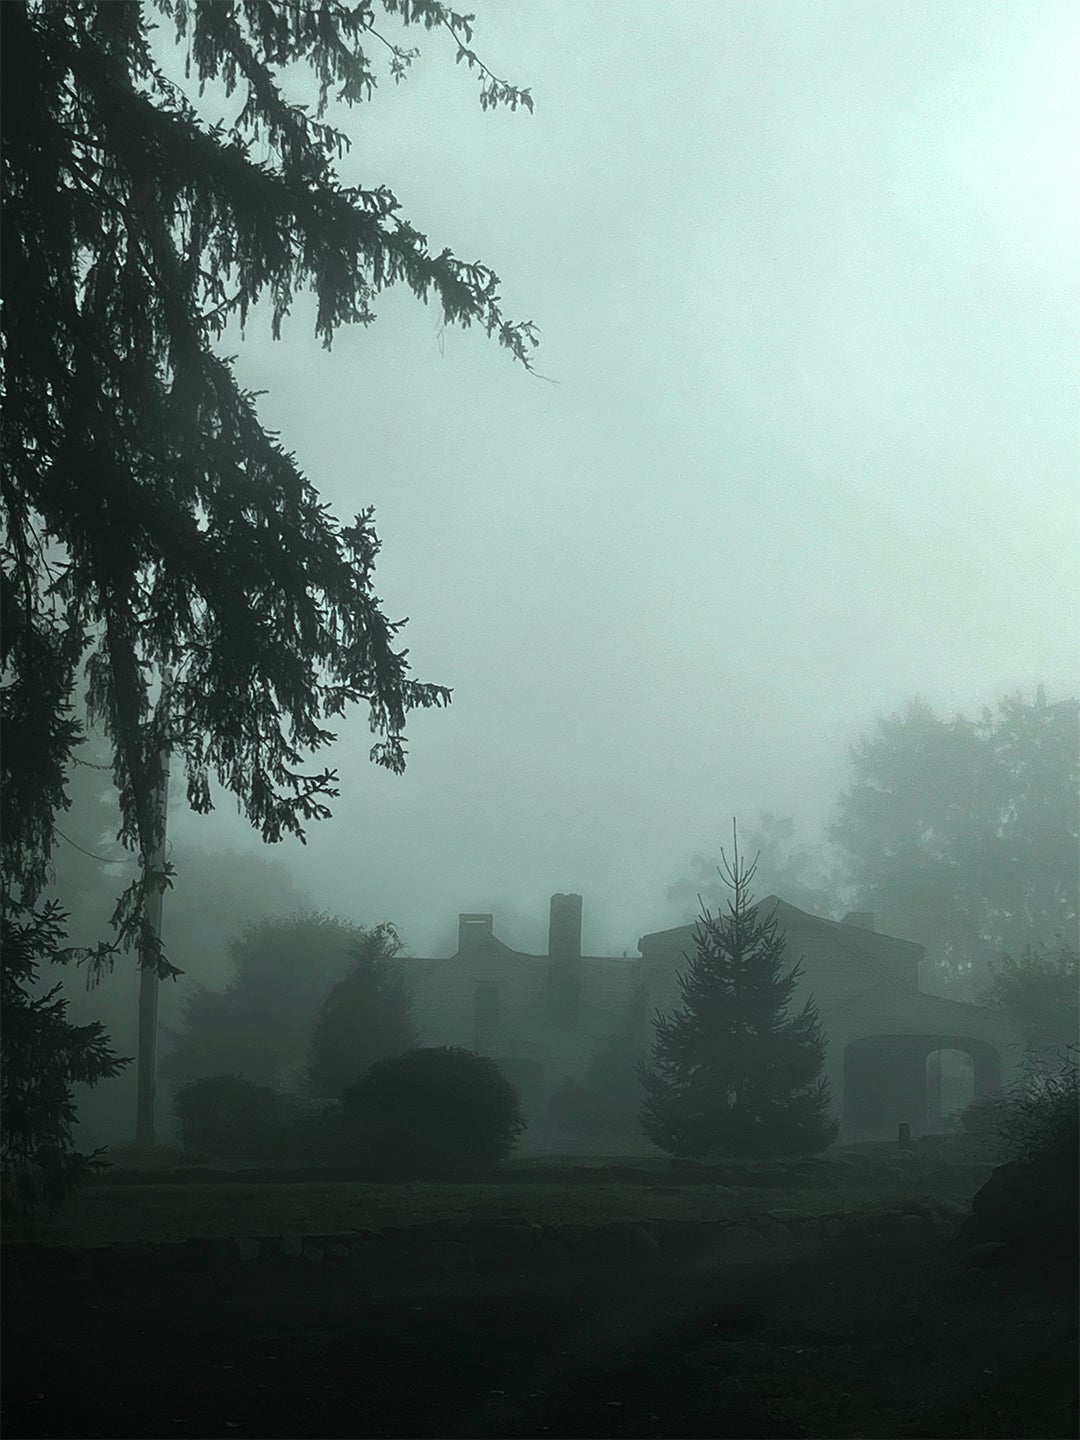 Spooky looking house in the mist